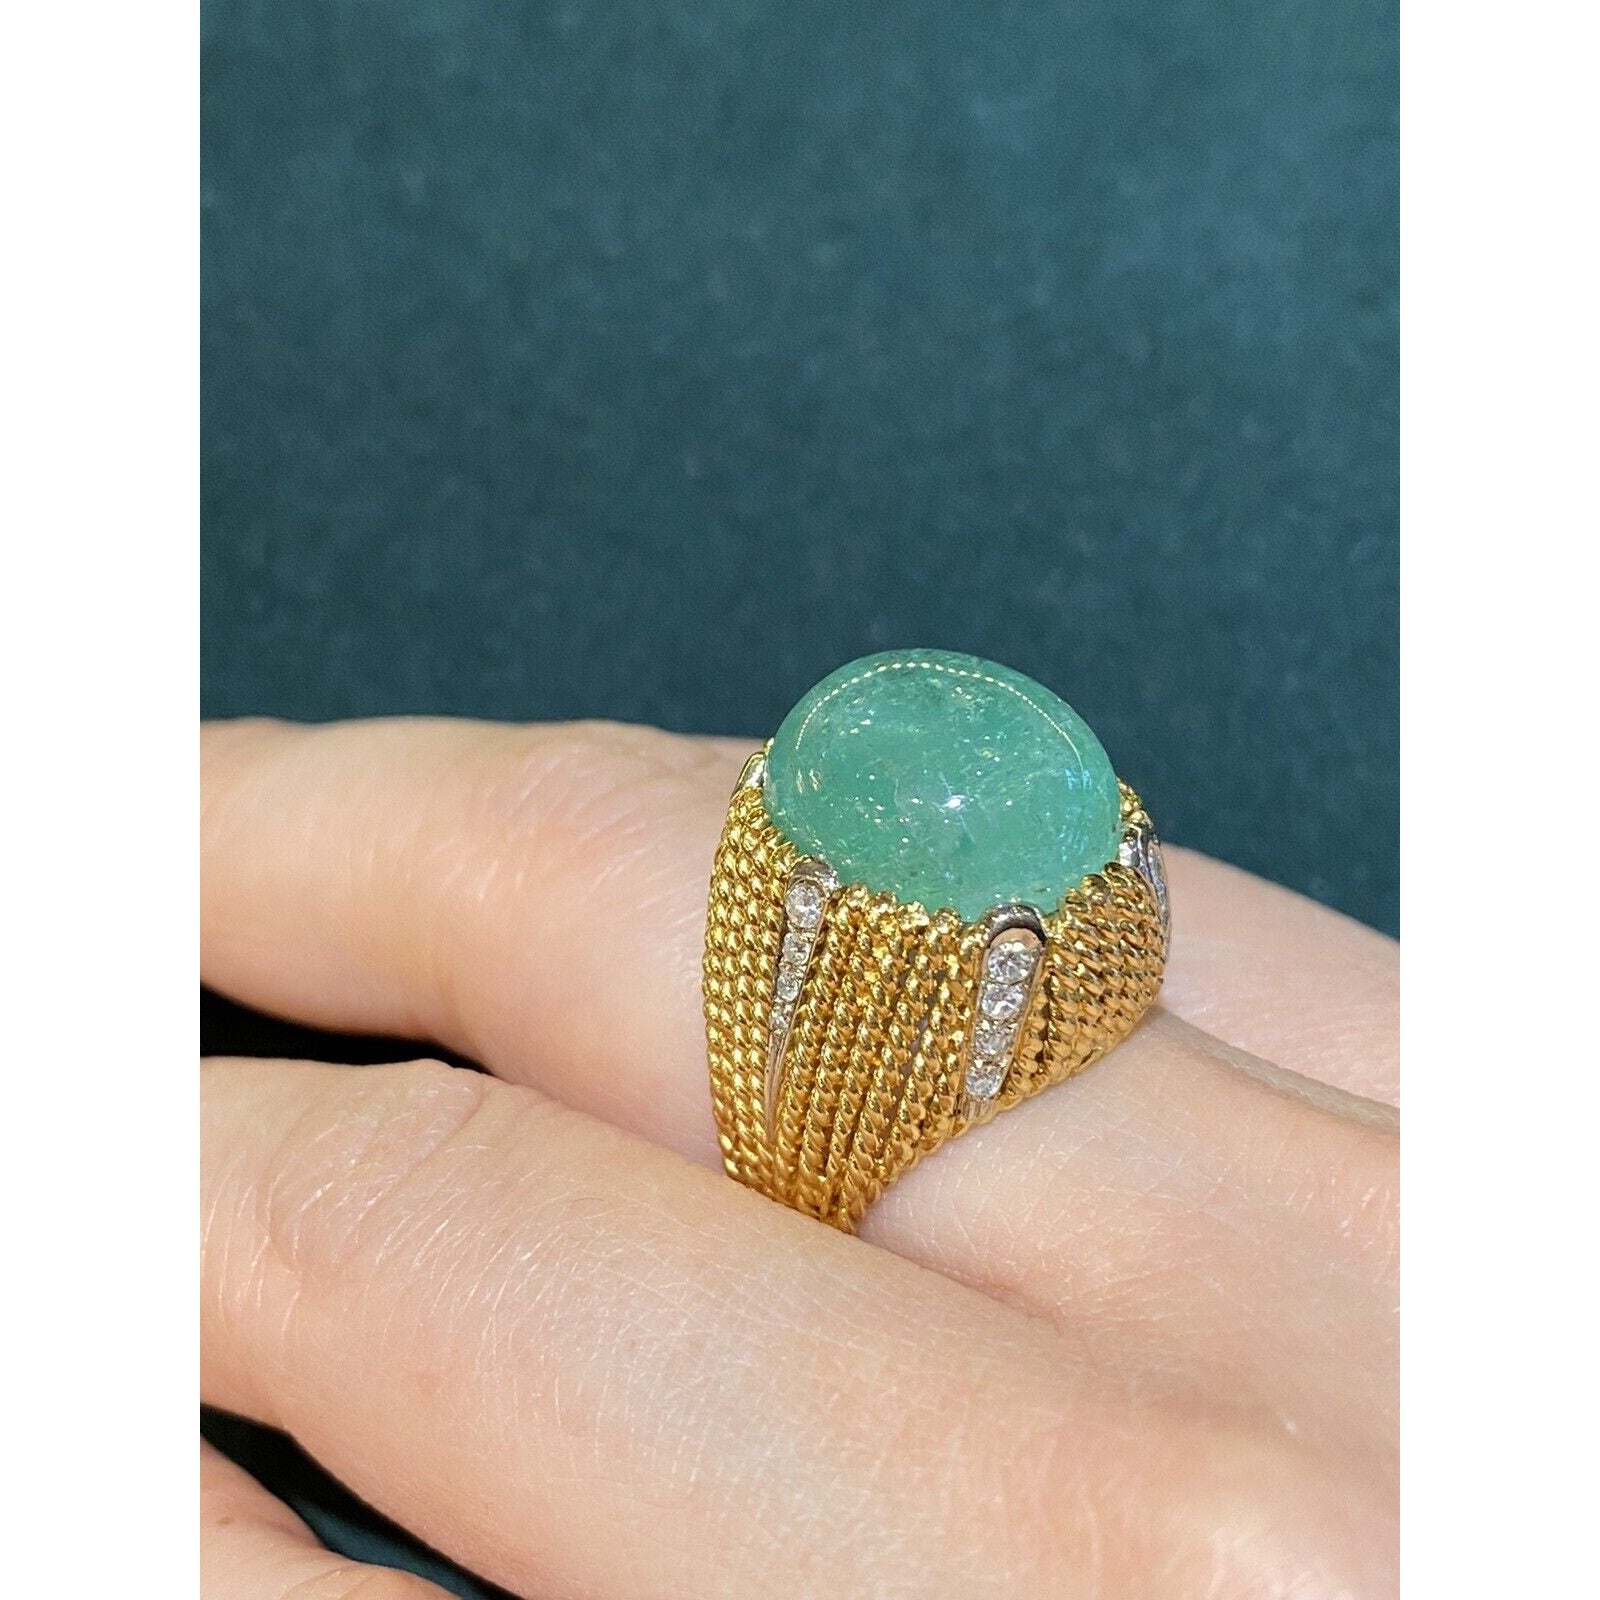 10 carat Emerald Cabochon & Diamond High Dome Cocktail Ring - HM2315AB